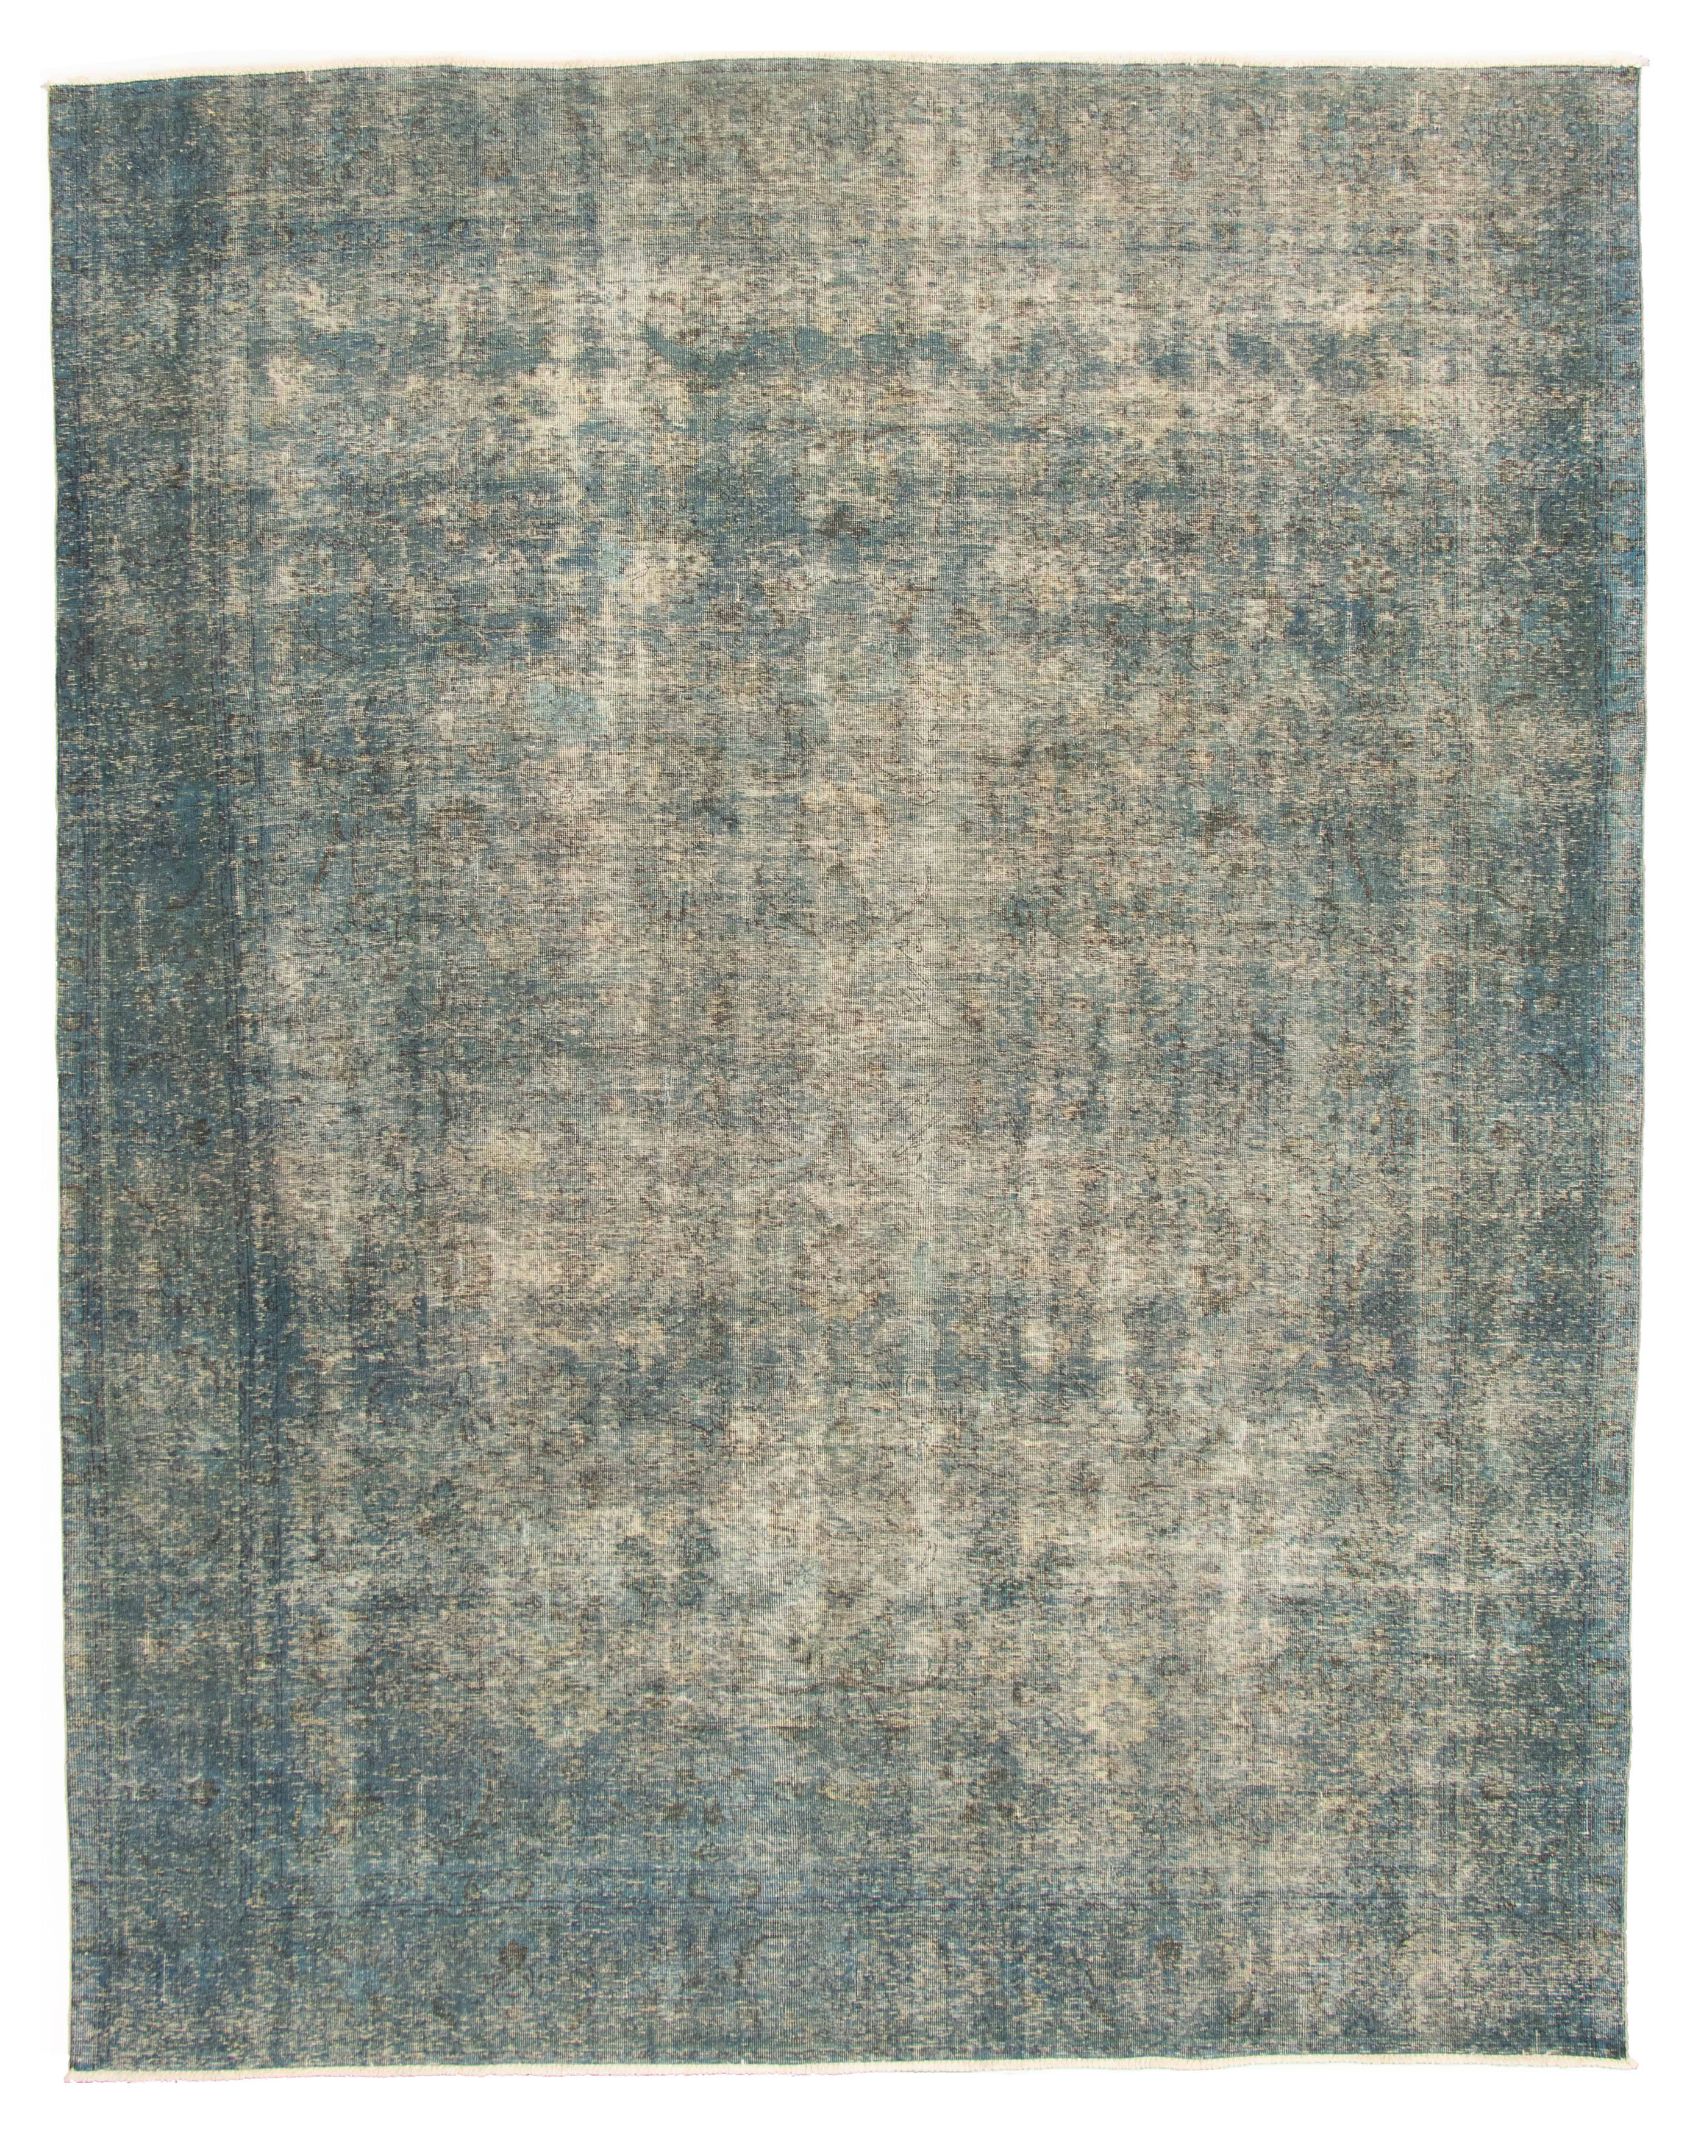 Hand-knotted Color Transition Dark Blue Wool Rug 9'8" x 12'3" Size: 9'8" x 12'3"  